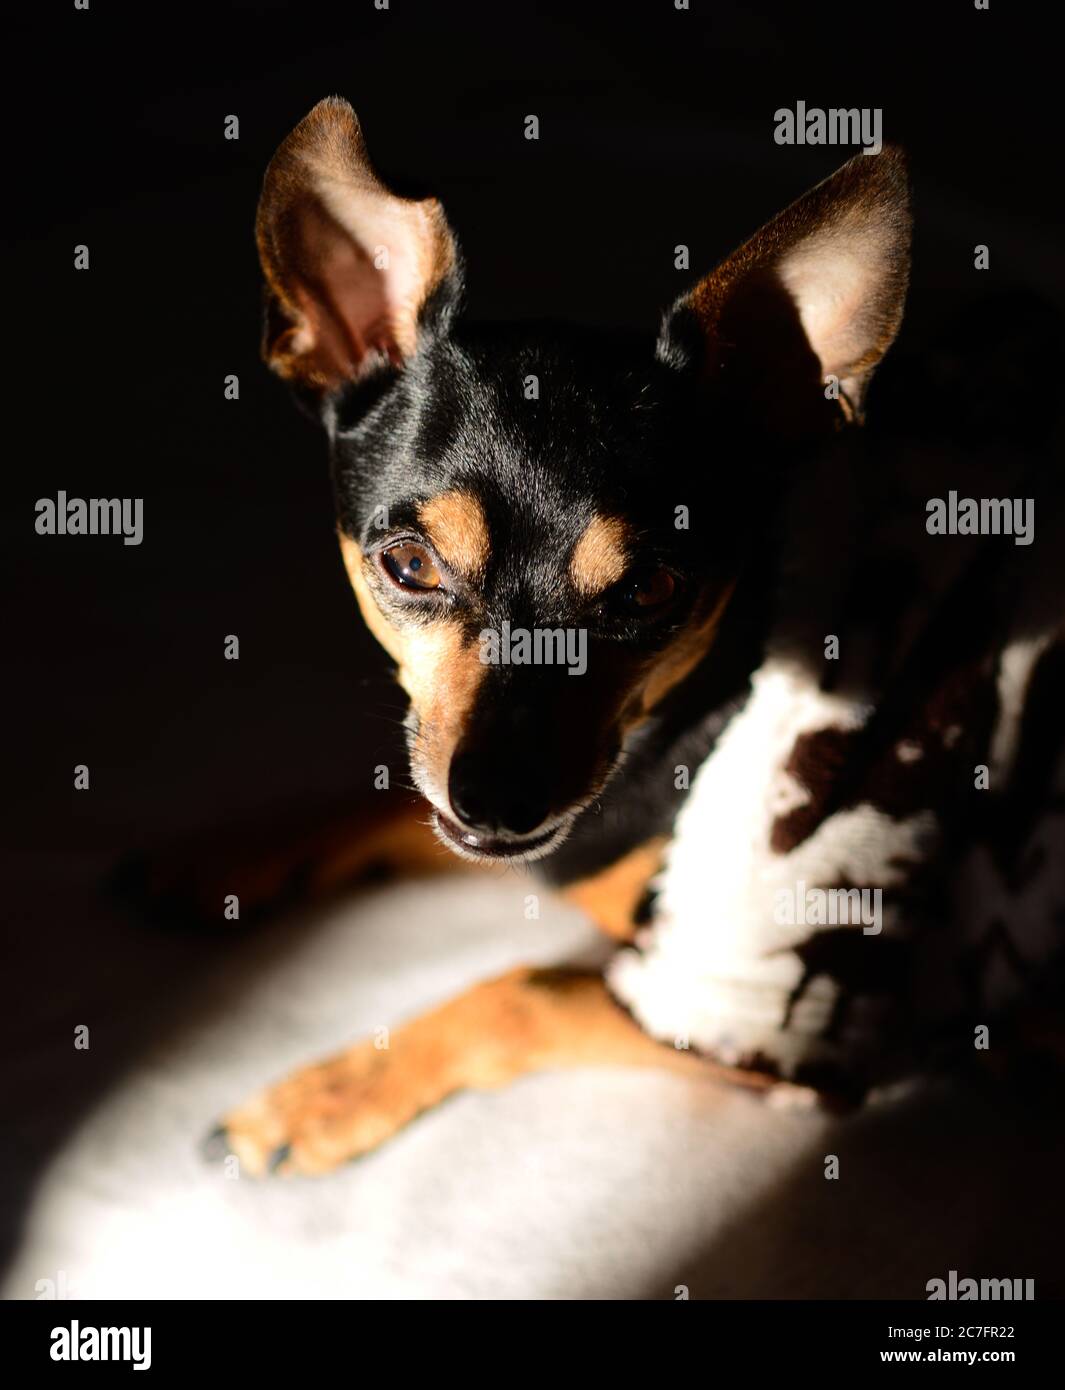 Vertical shot of a Prague ratter dog sitting in a dark room Stock Photo